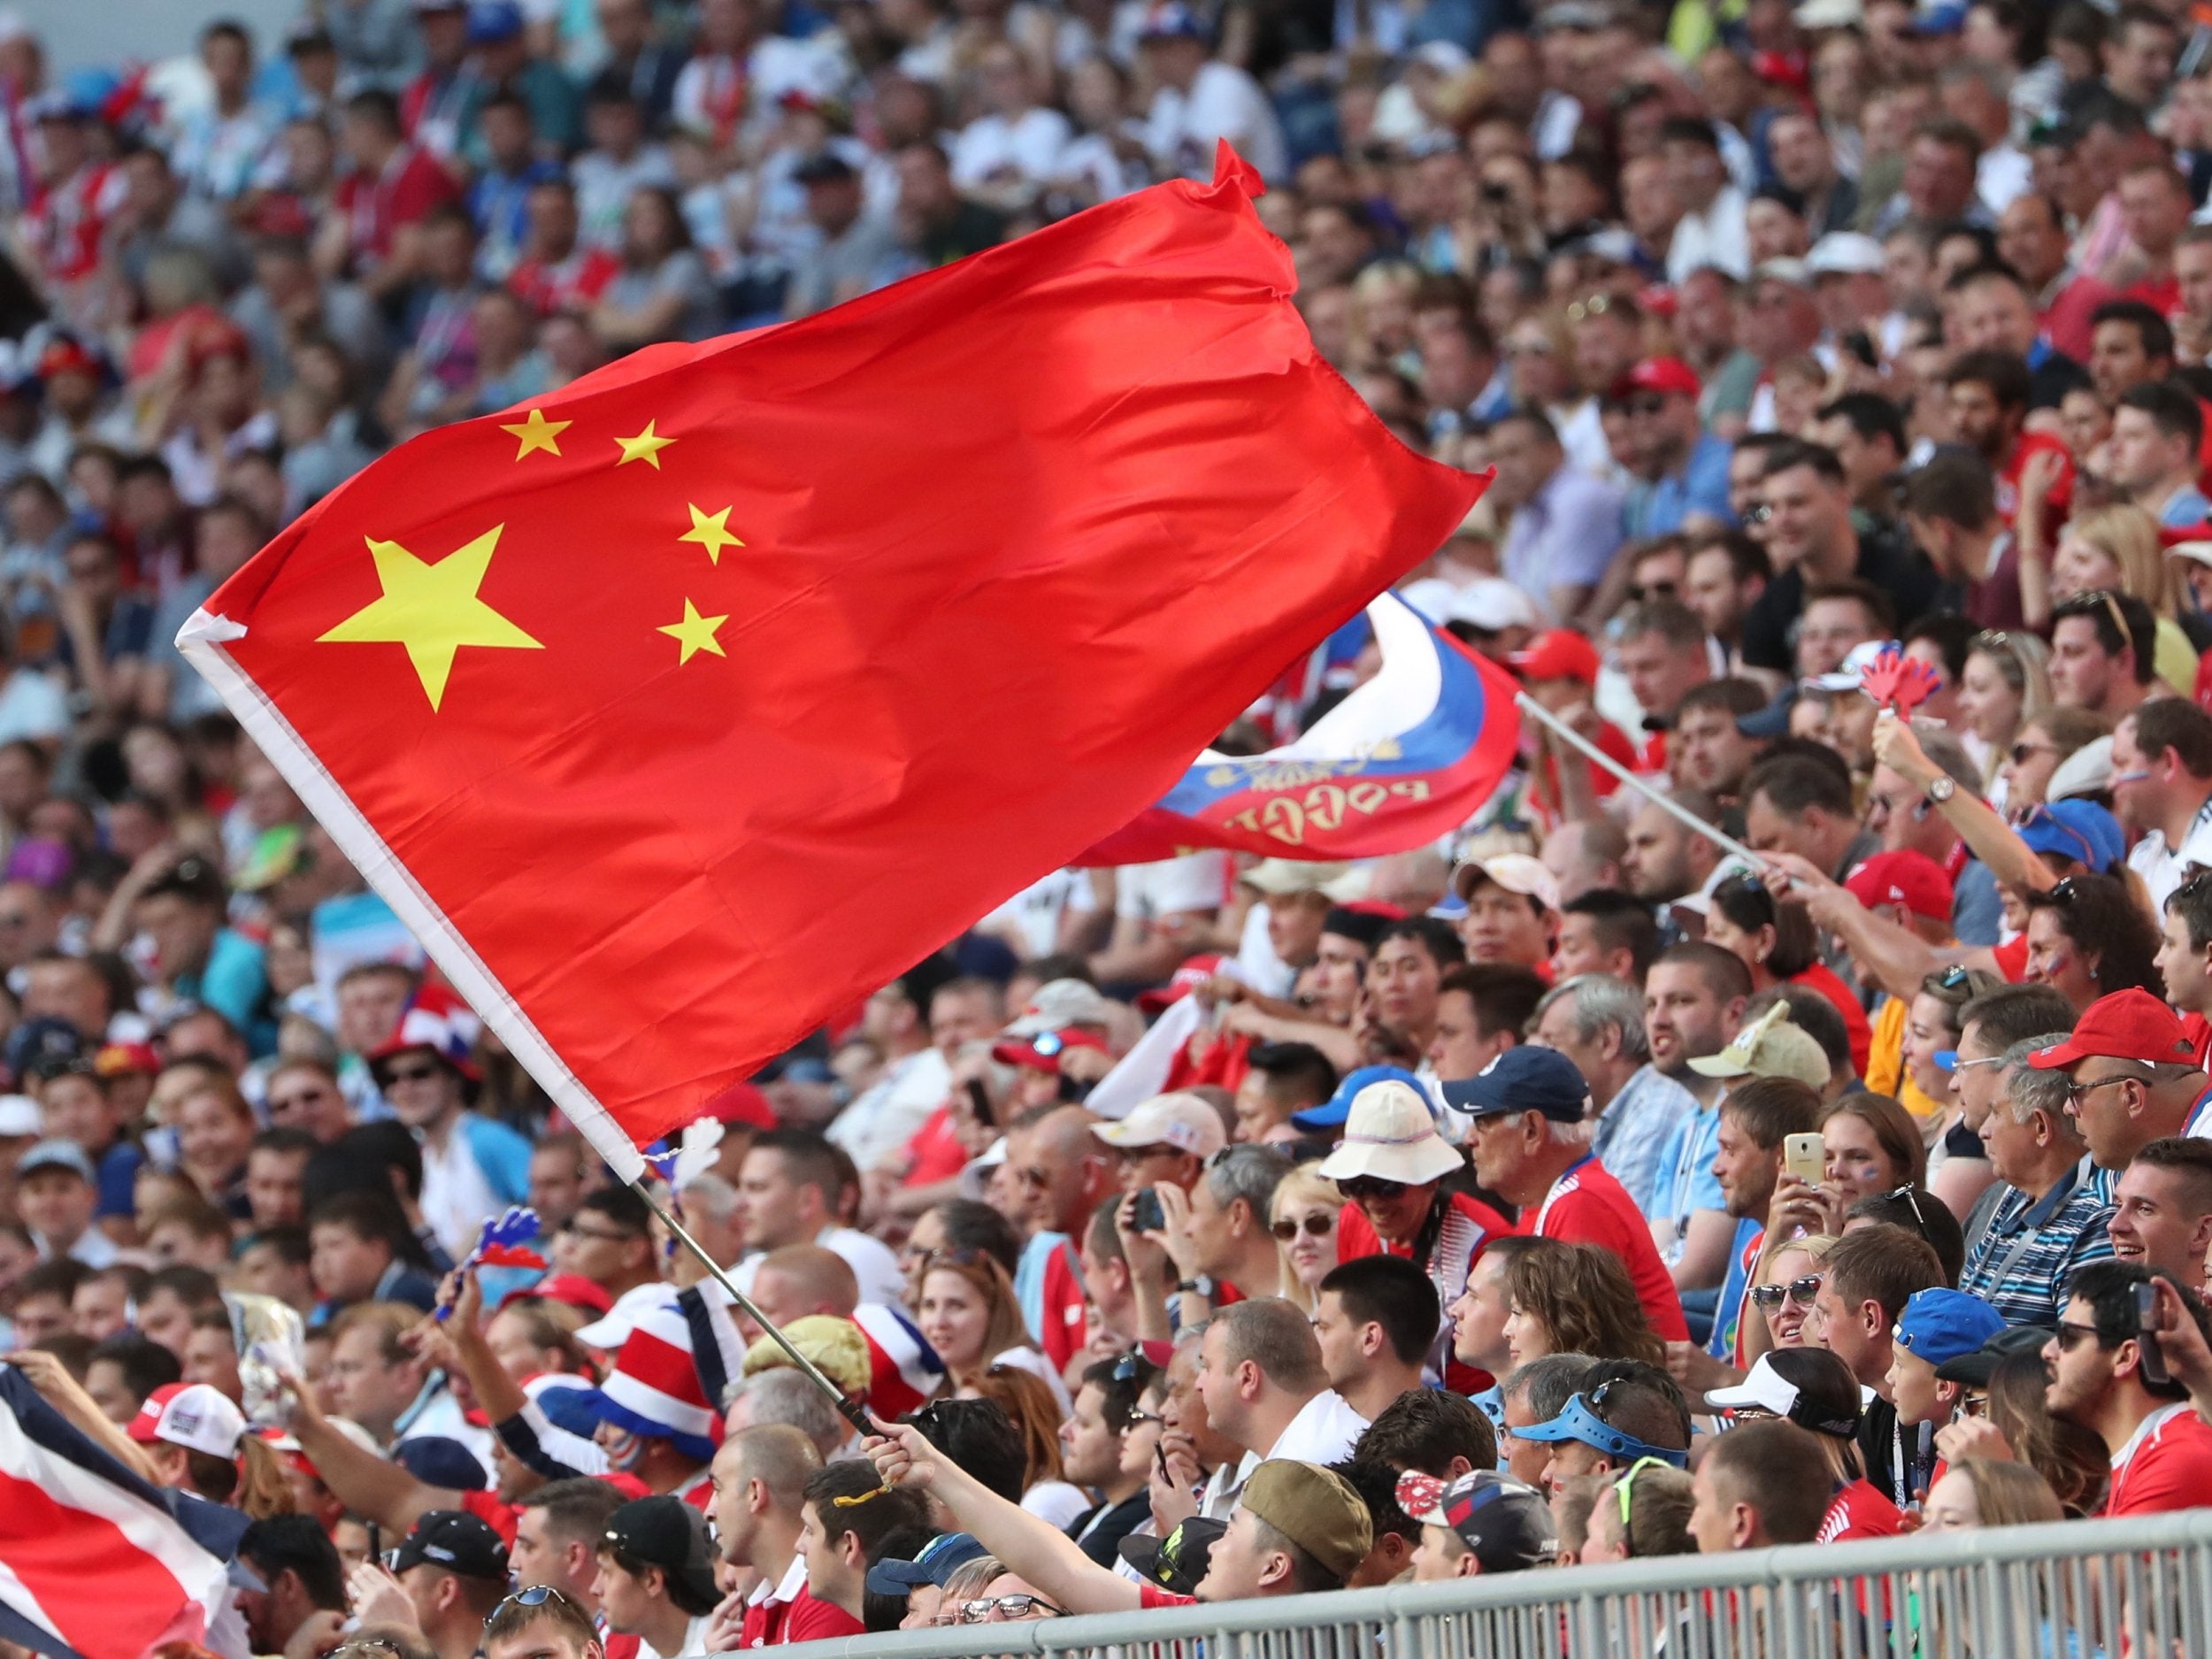 60,000 tickets have been bought by Chinese fans